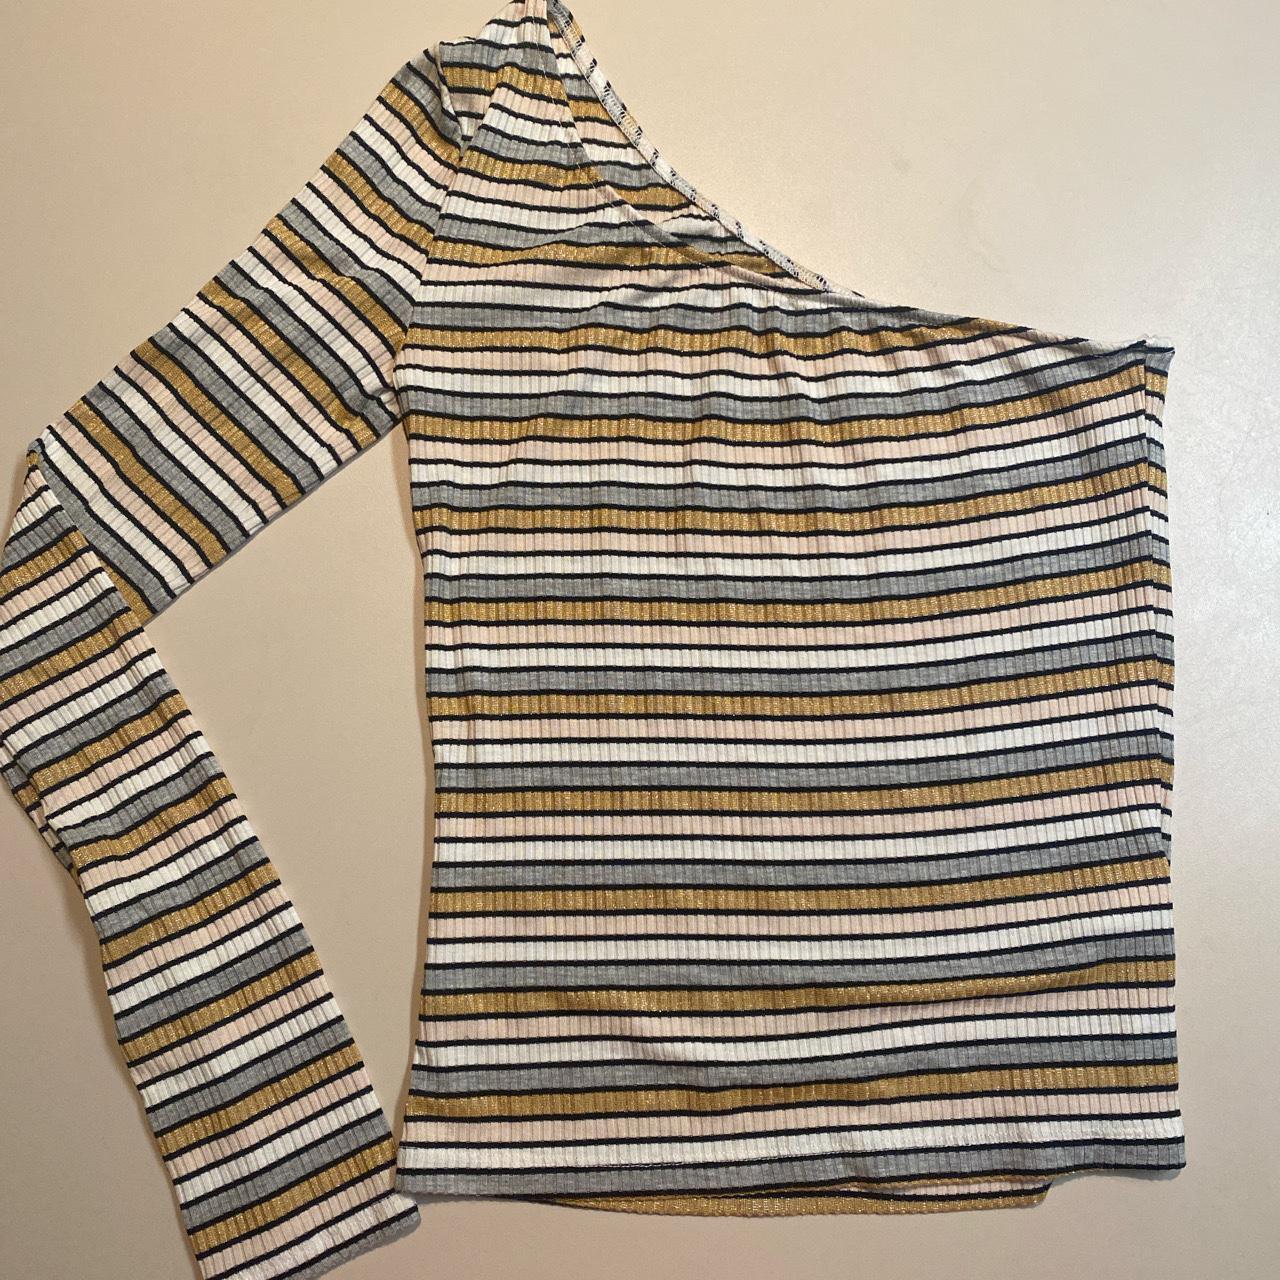 Product Image 4 - NWT One Shoulder striped Aeropostale